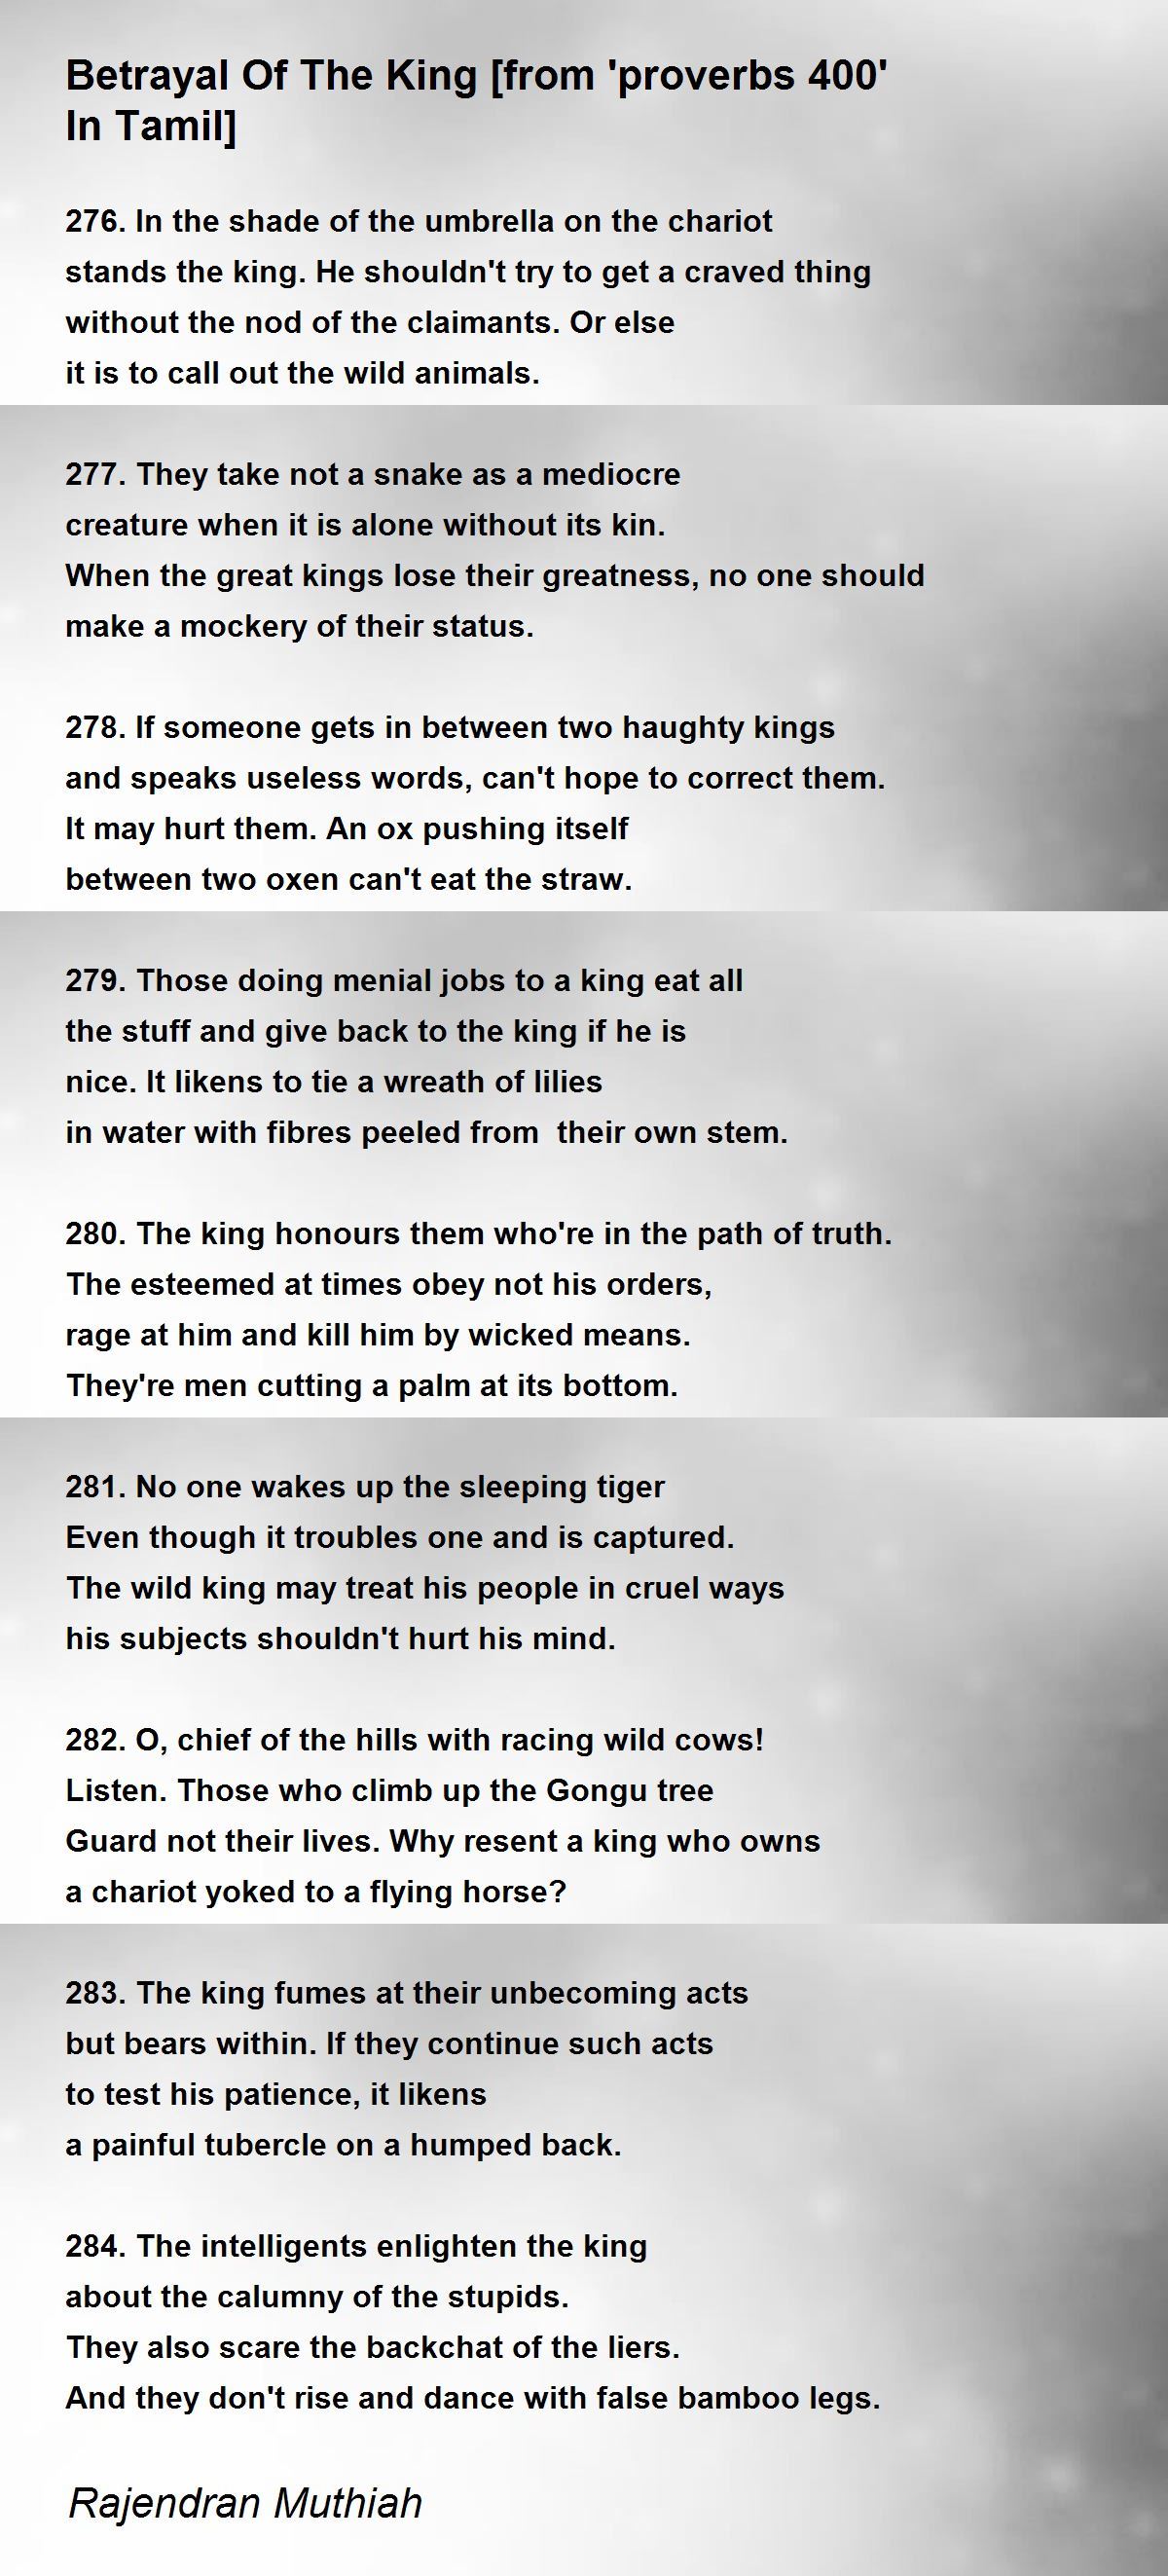 Betrayal Of The King [from 'proverbs 400' In Tamil] - Betrayal Of The King  [from 'proverbs 400' In Tamil] Poem by Rajendran Muthiah